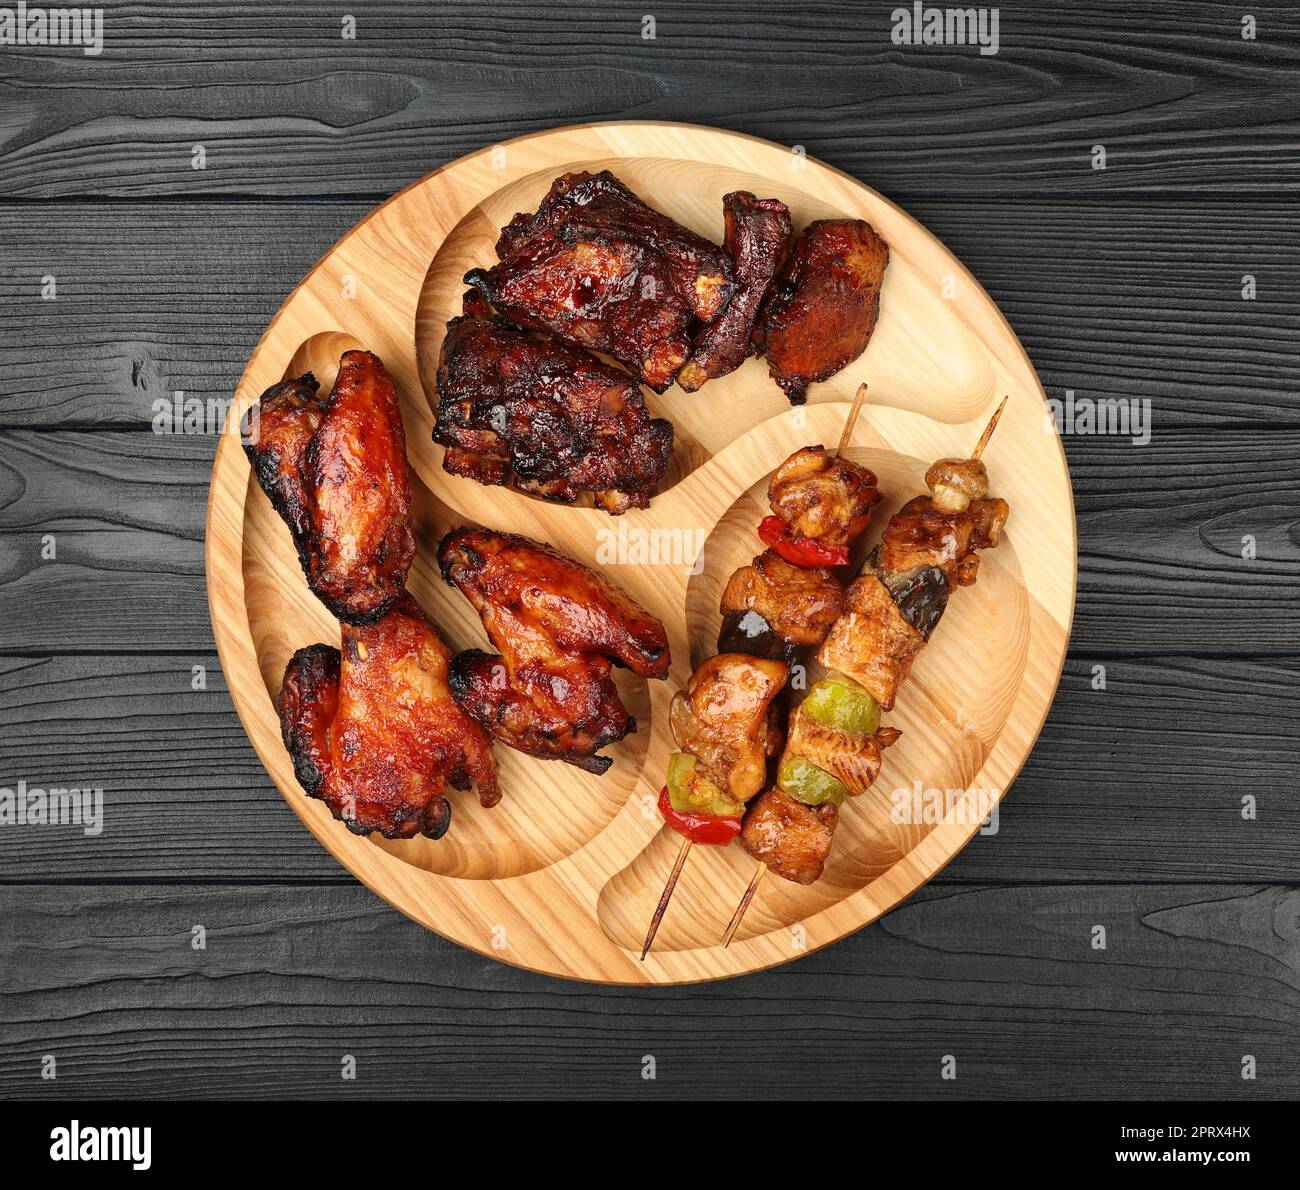 Mixed barbecue of chicken wings and beef ribs Stock Photo